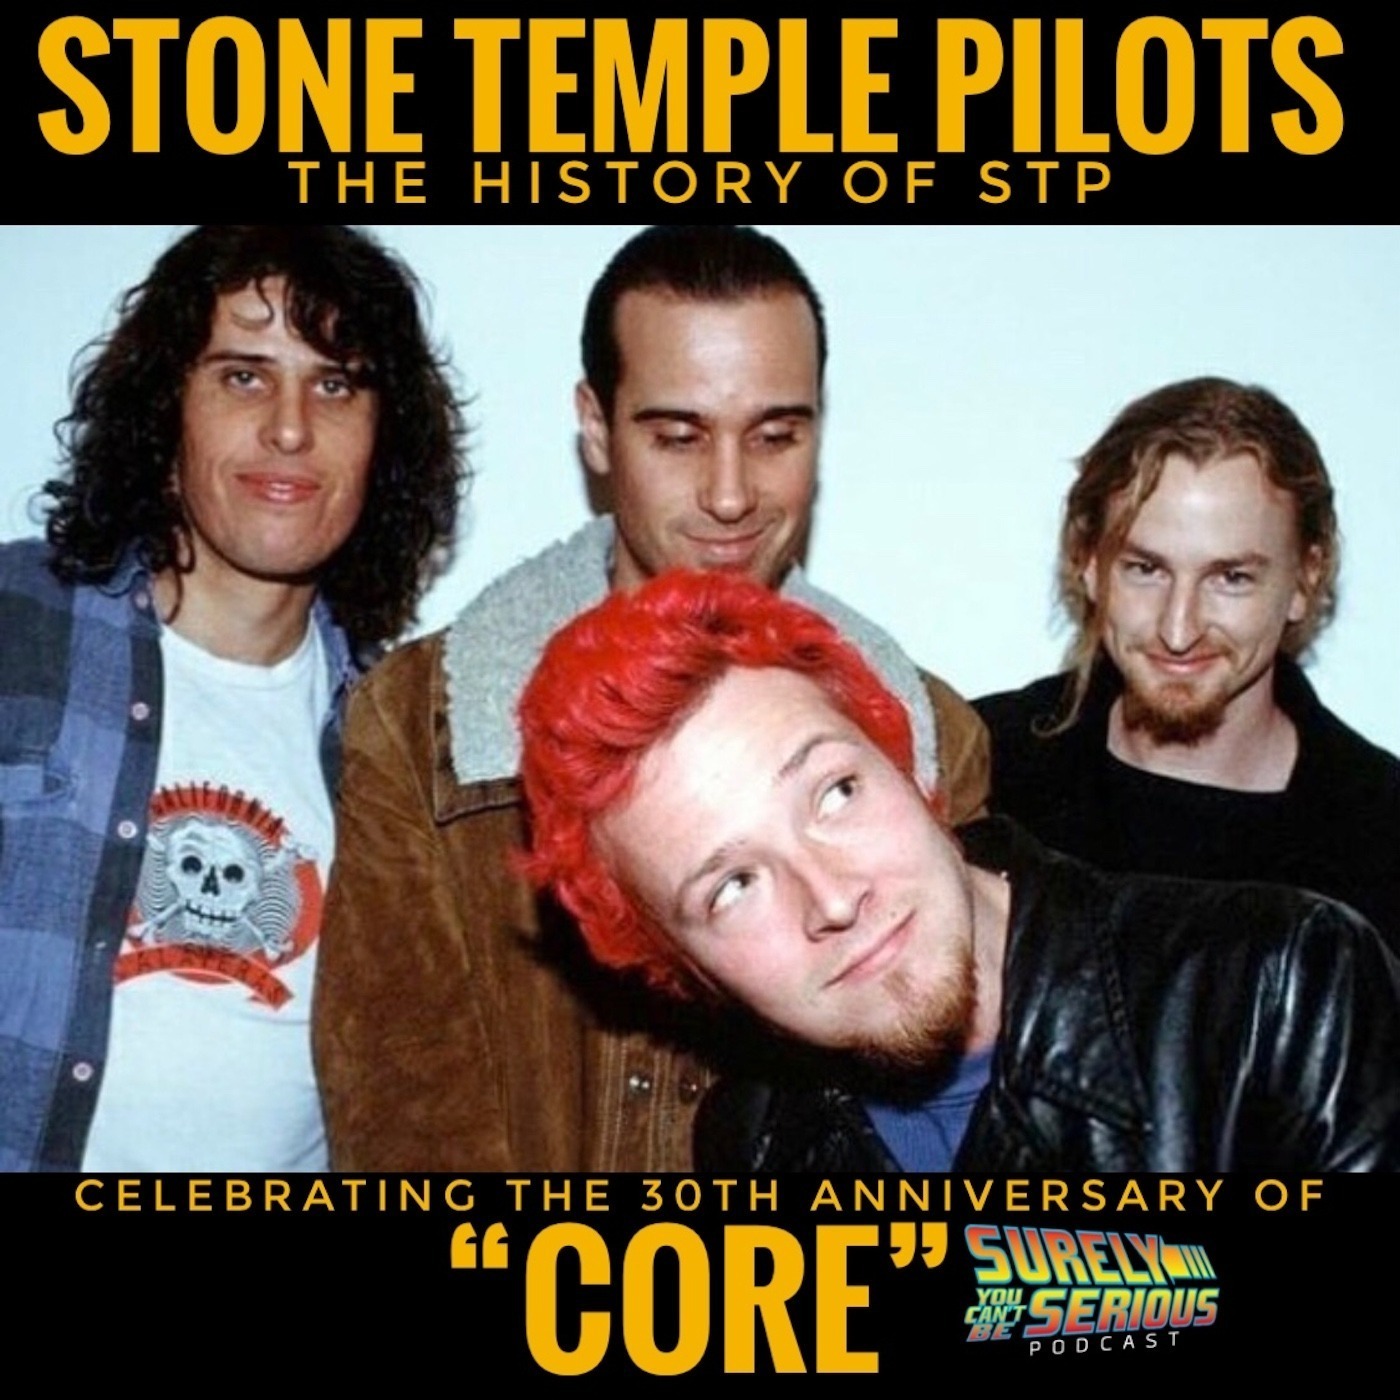 Stone Temple Pilots: The History of STP Image